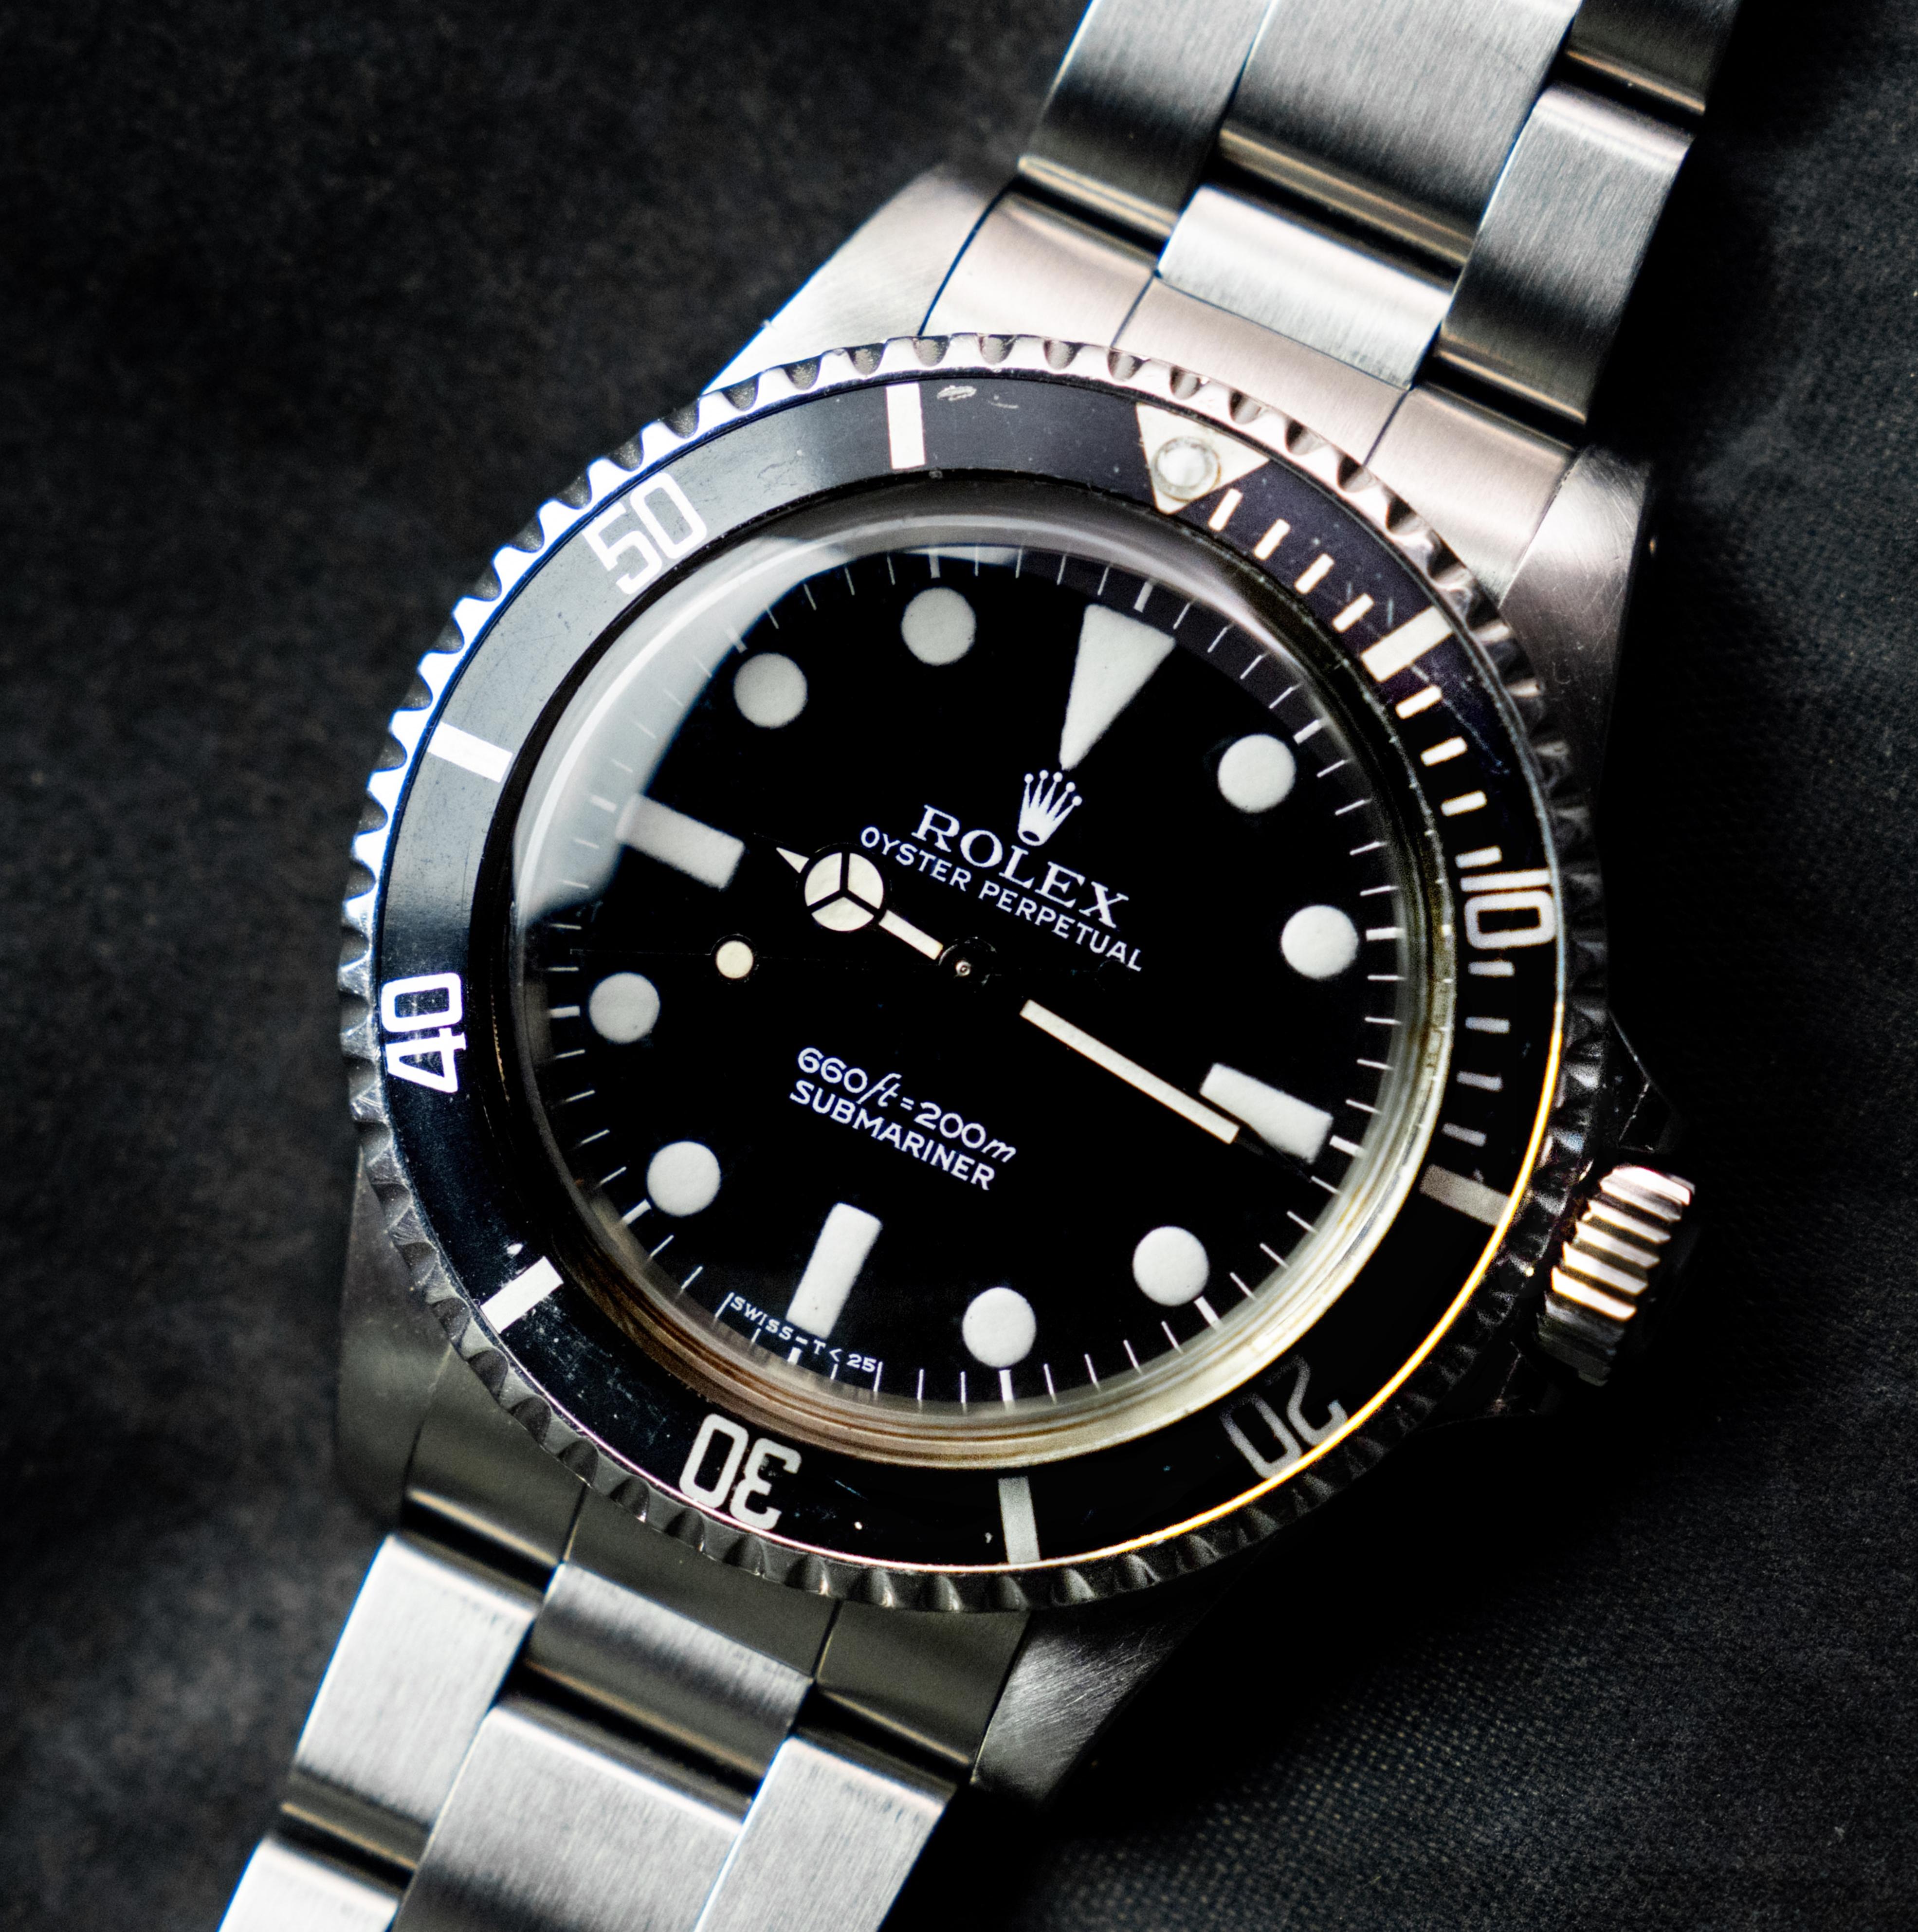 Rolex Steel Submariner Maxi MK I Matte Dial 5513 Steel Automatic Watch, 1978 For Sale 1